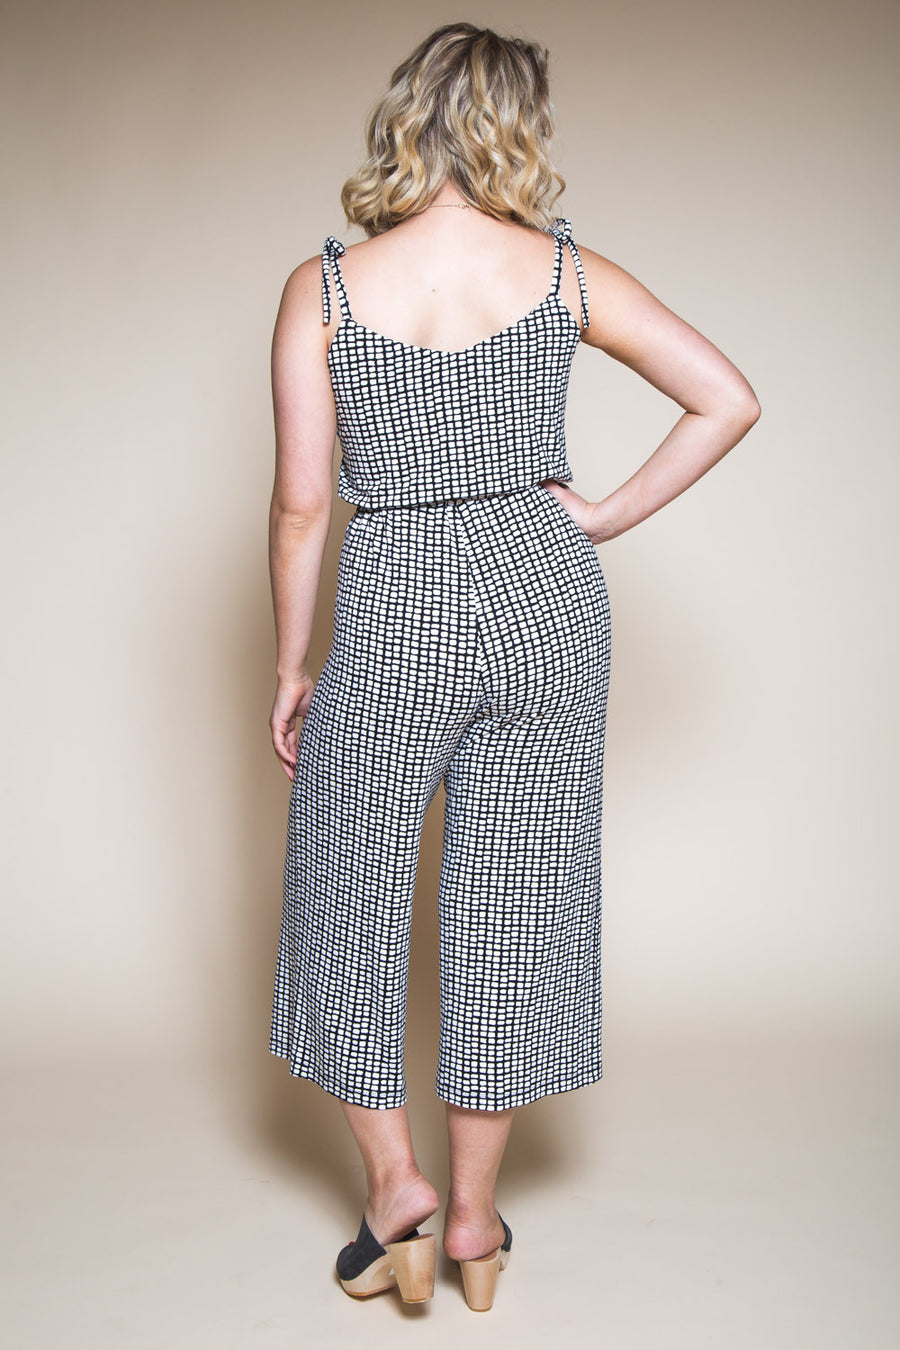 16 Latest Jumpsuits That Will Make Getting Dressed So Easy